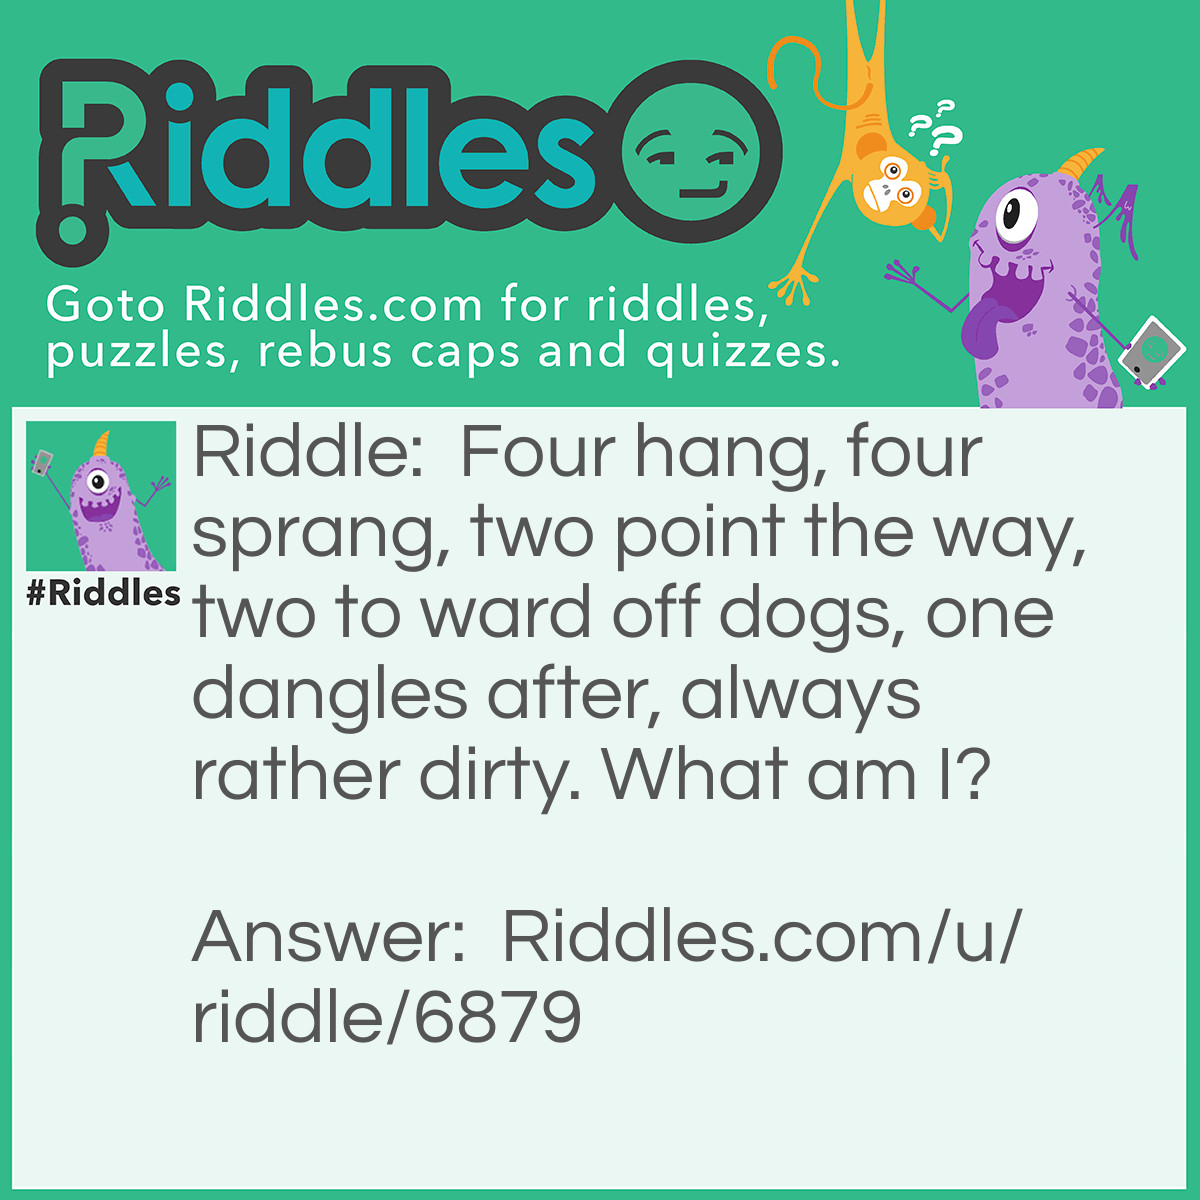 Riddle: Four hang, four sprang, two point the way, two to ward off dogs, one dangles after, always rather dirty. What am I? Answer: A cow.